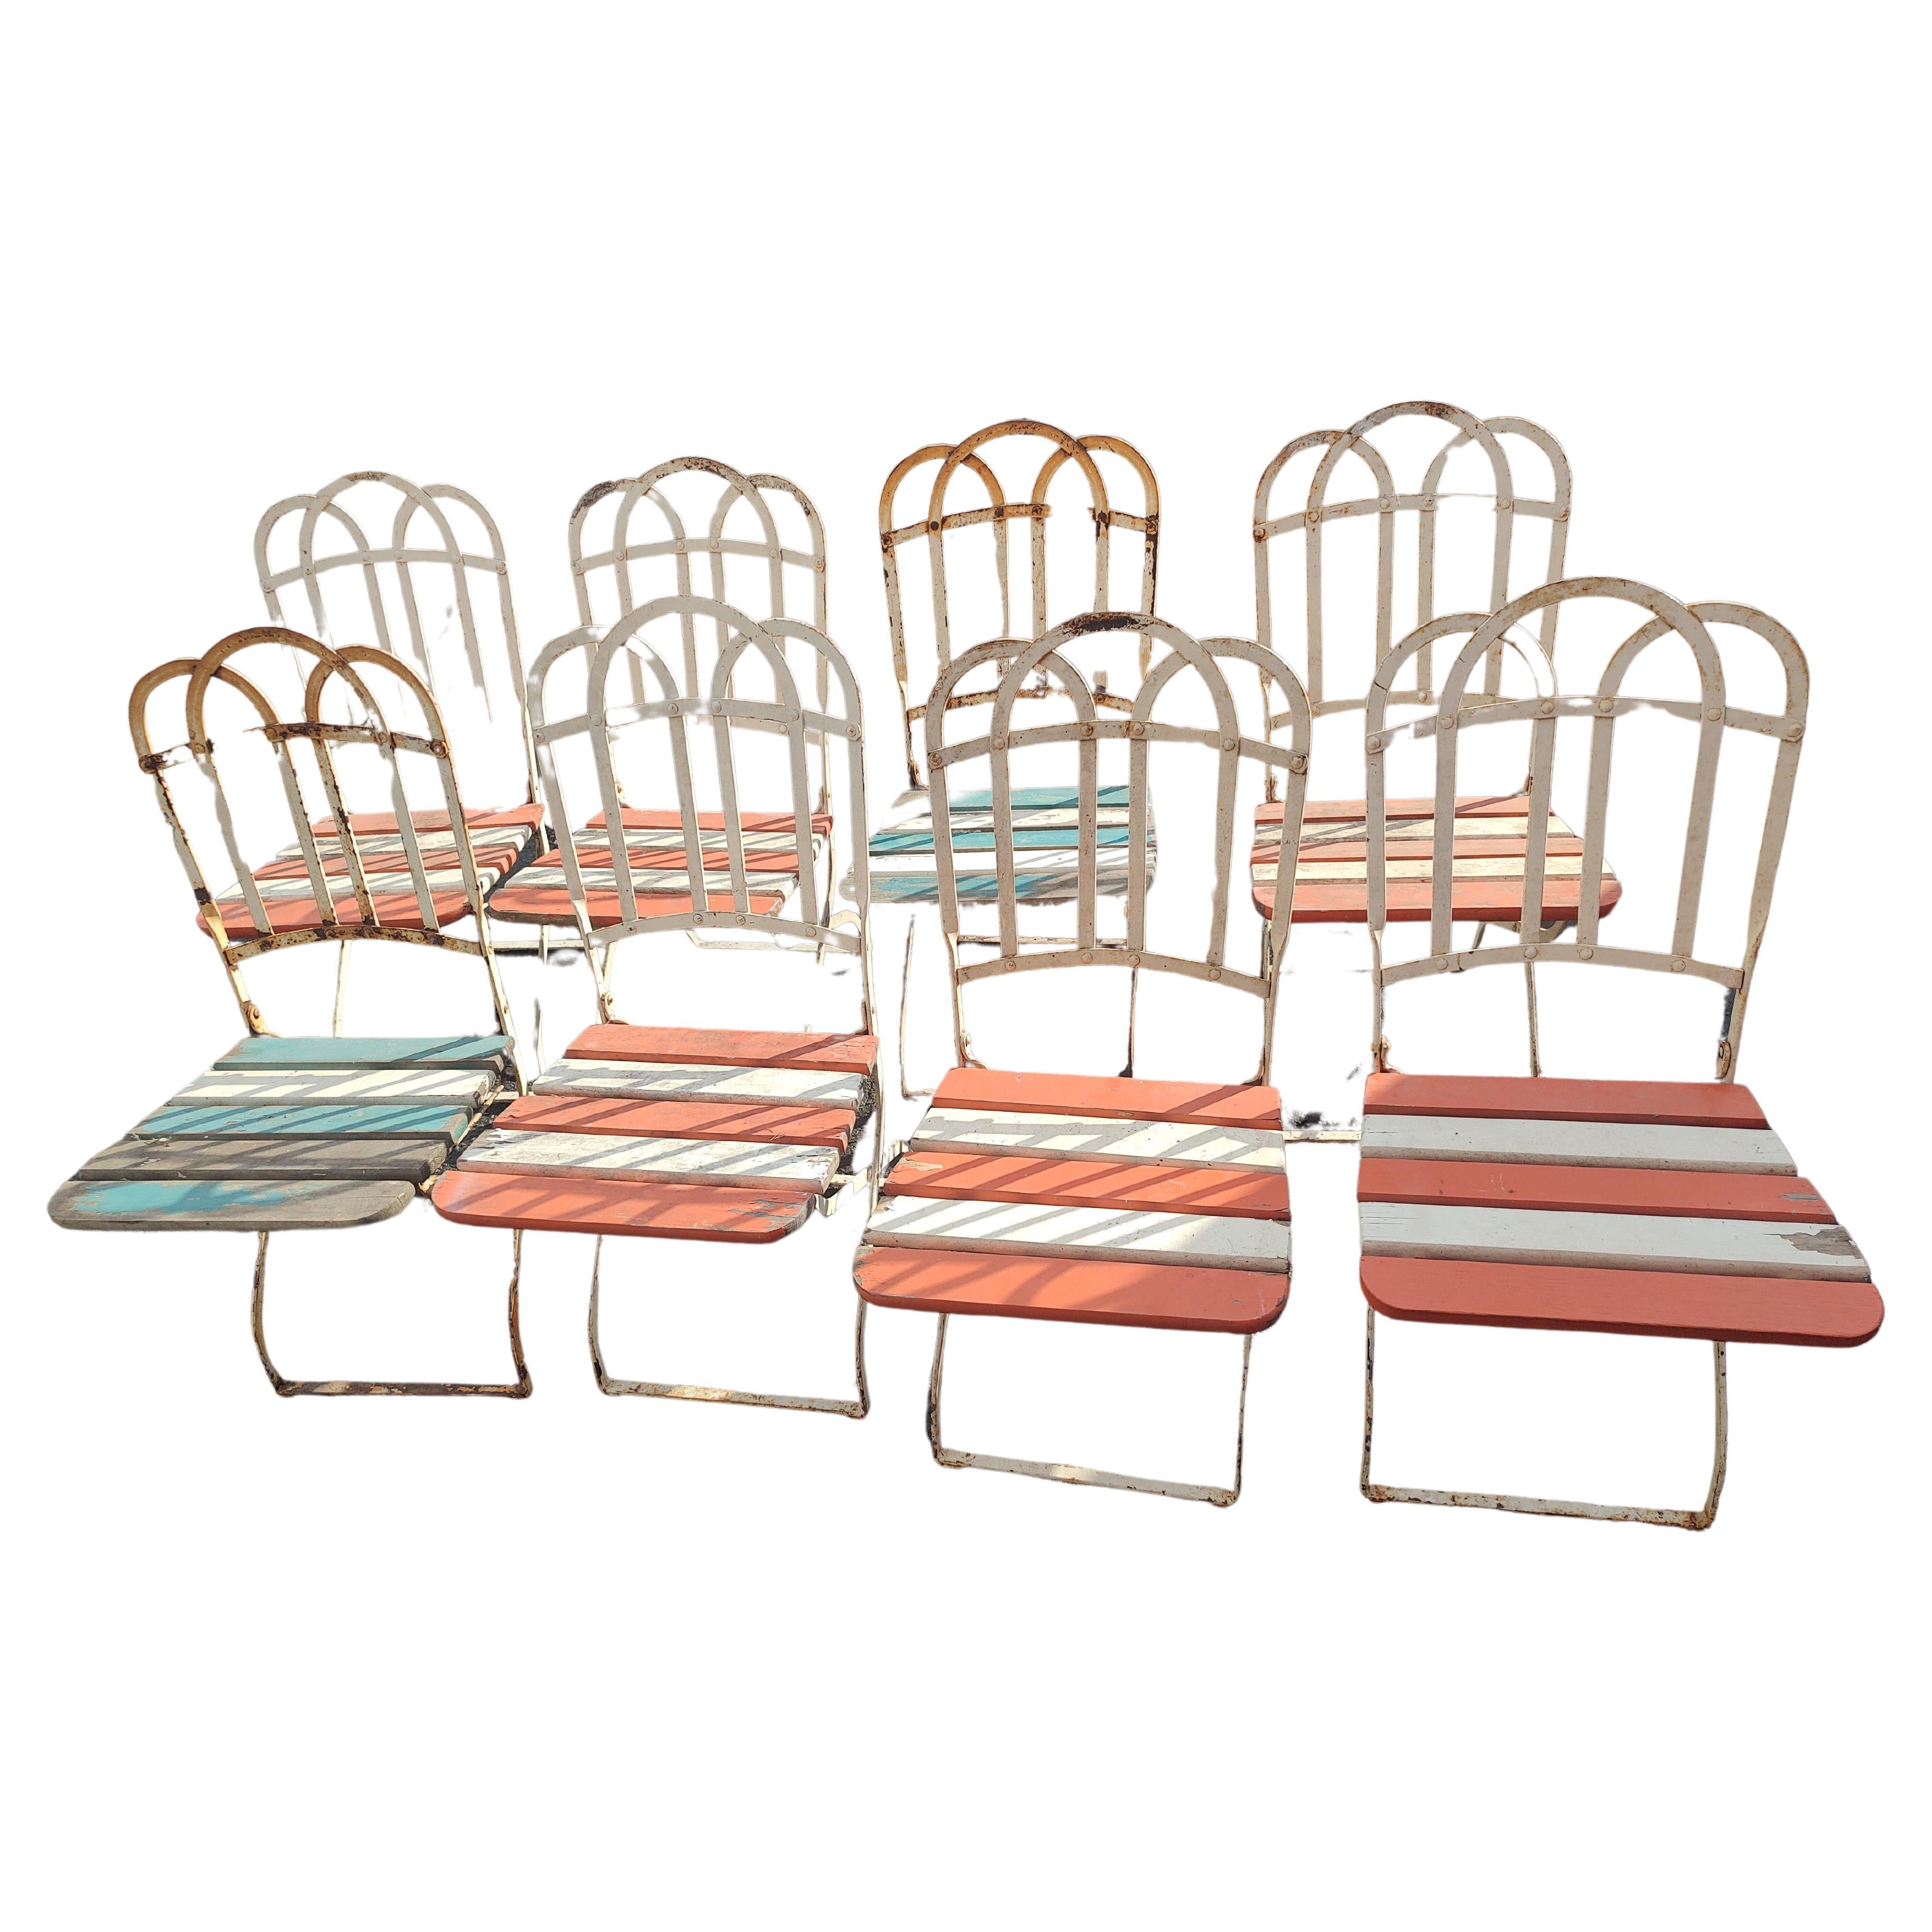 Set of 8 French Fold-up Iron with Slatted Wood Cafe Garden Dining Chairs C1920 For Sale